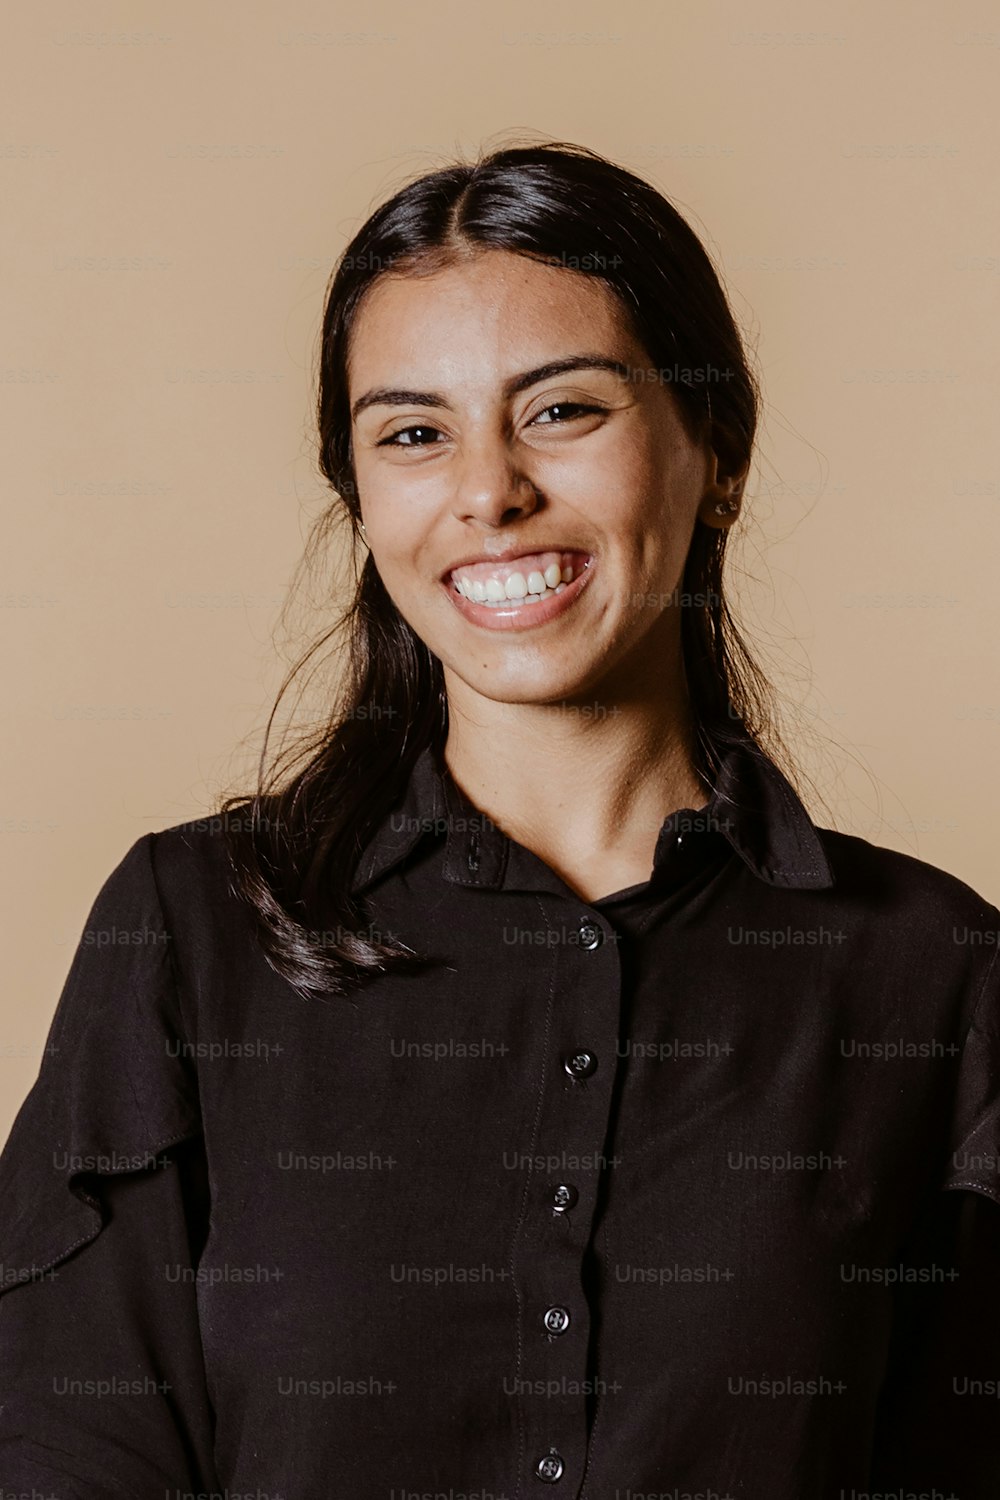 a smiling woman in a black shirt